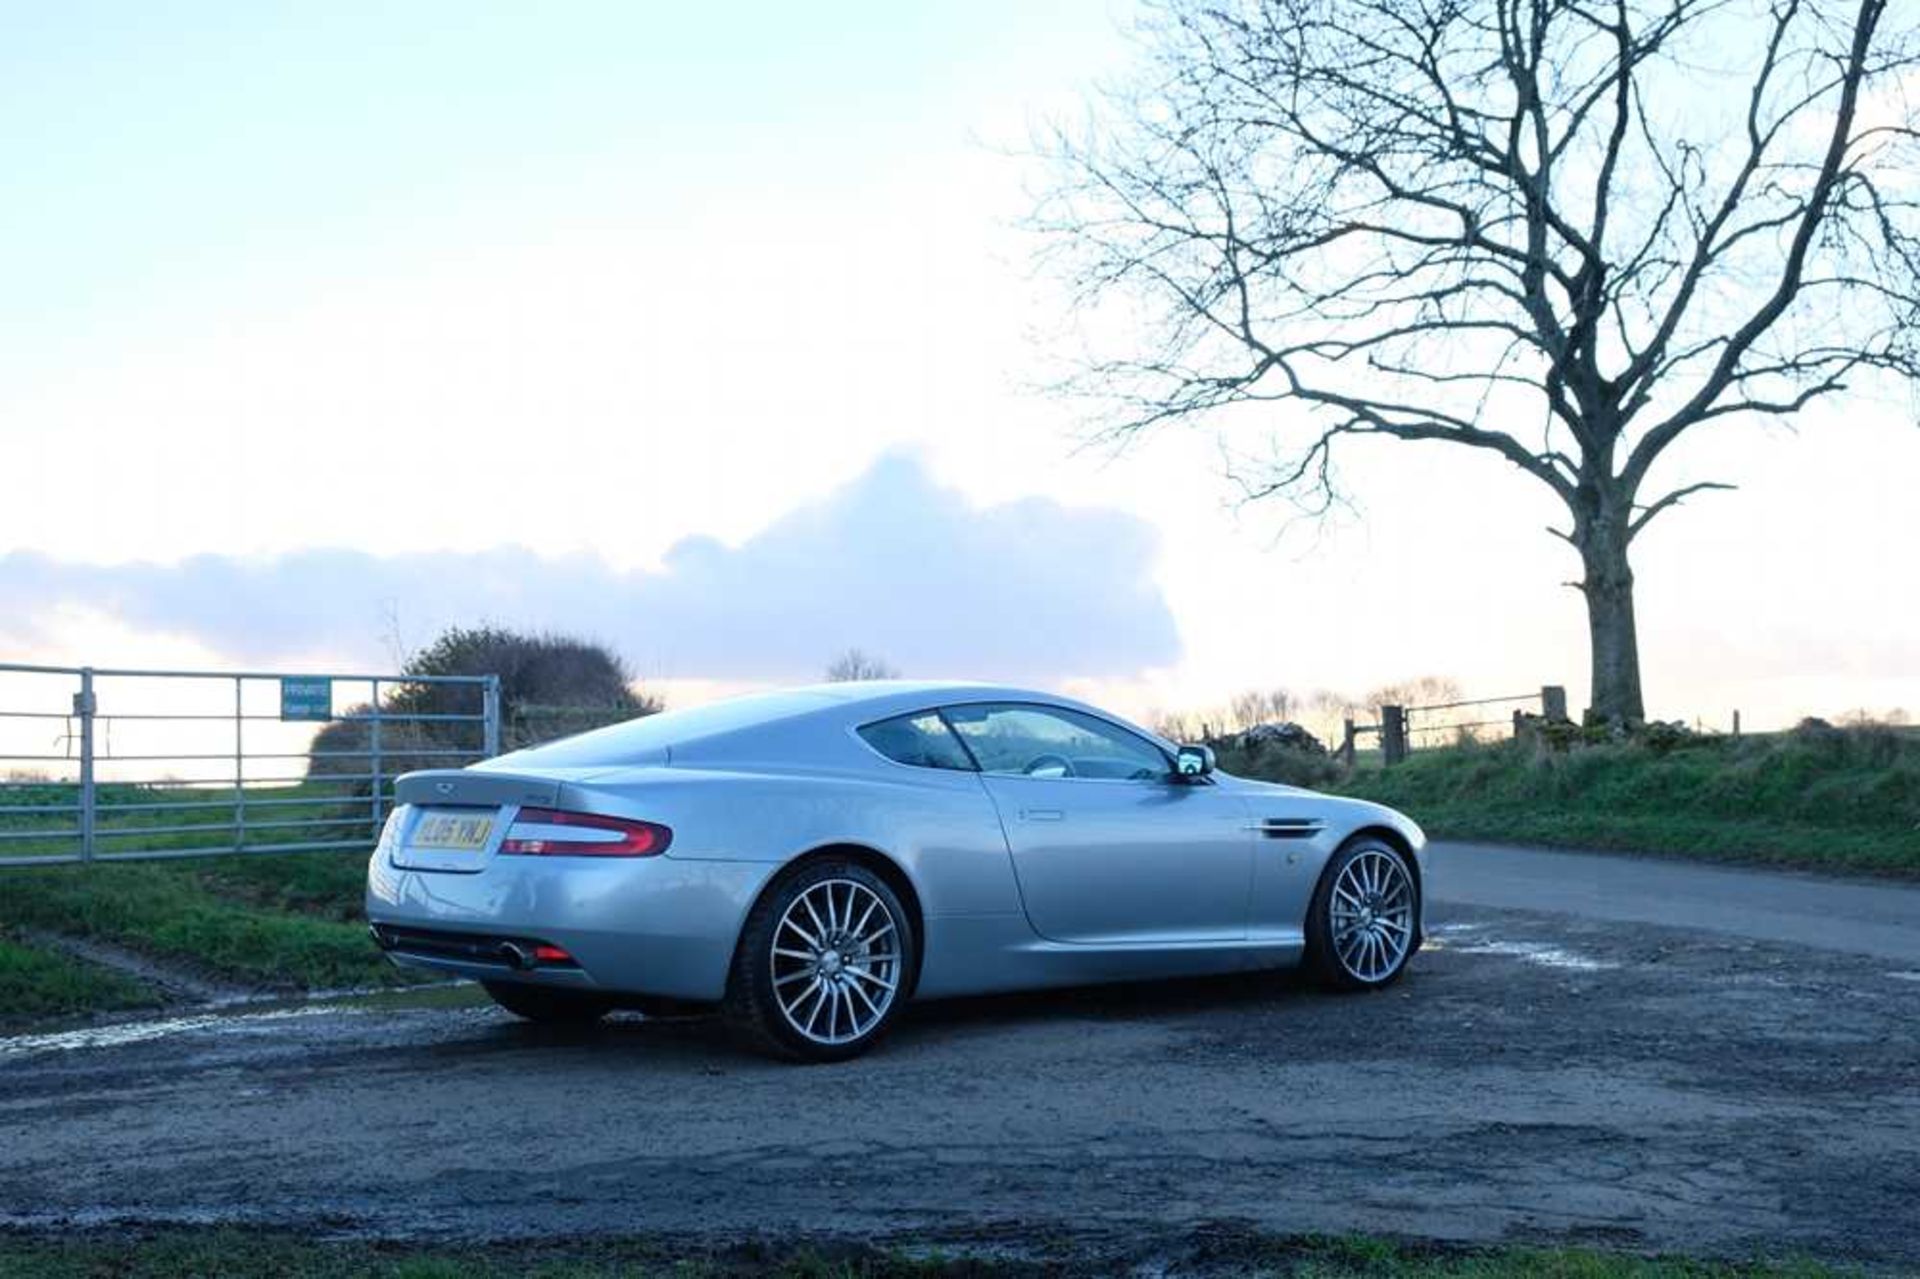 2005 Aston Martin DB9 c.25,000 from new and 4 former keepers - Image 25 of 59